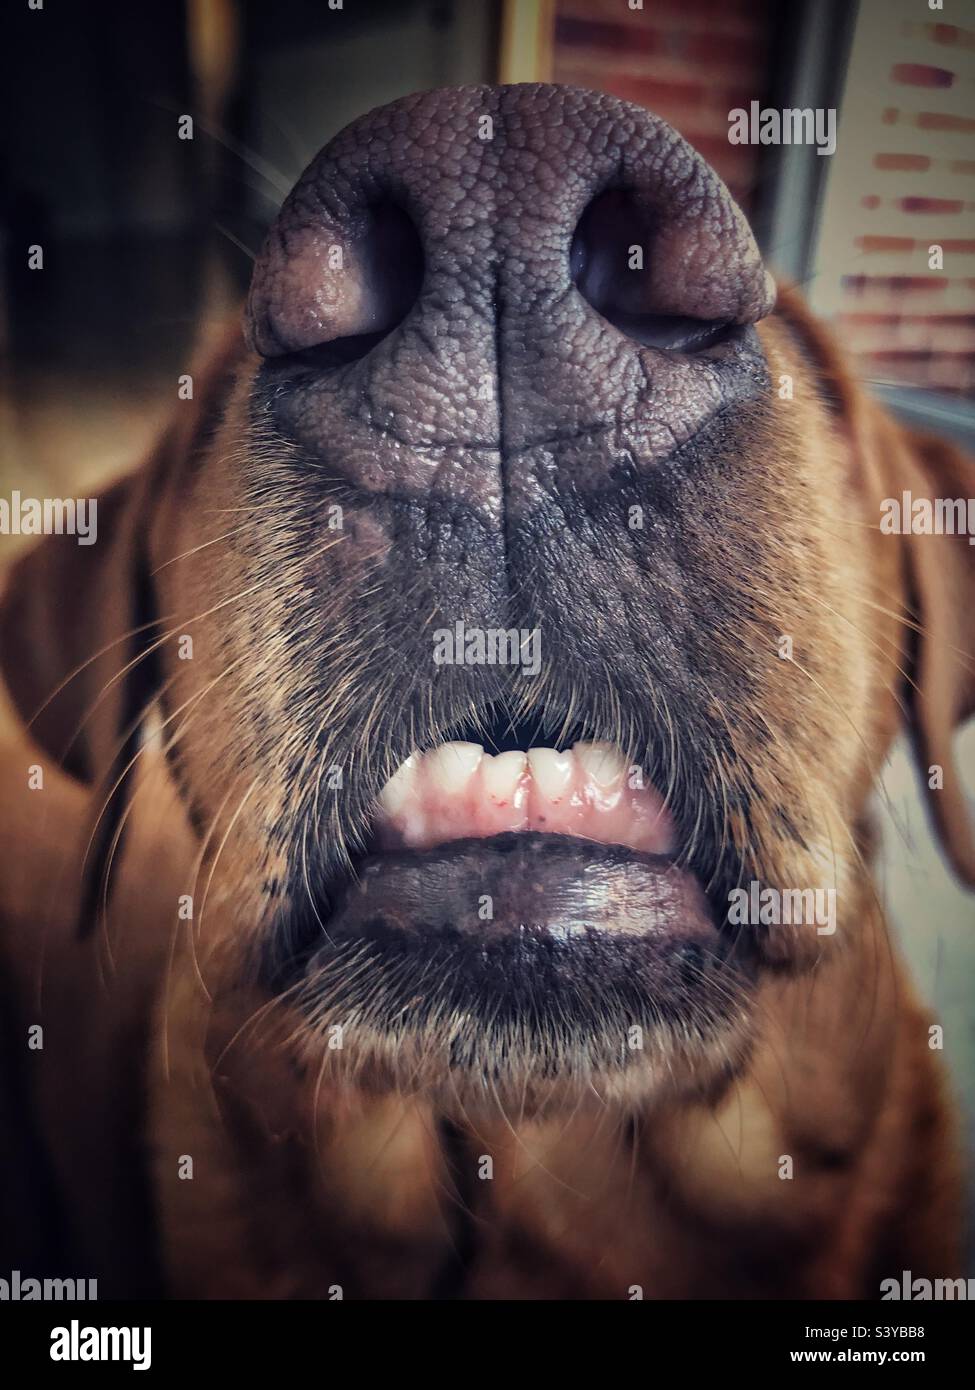 Close-up of the nose and open mouth of a pet dog with teeth showing and an underbite Stock Photo